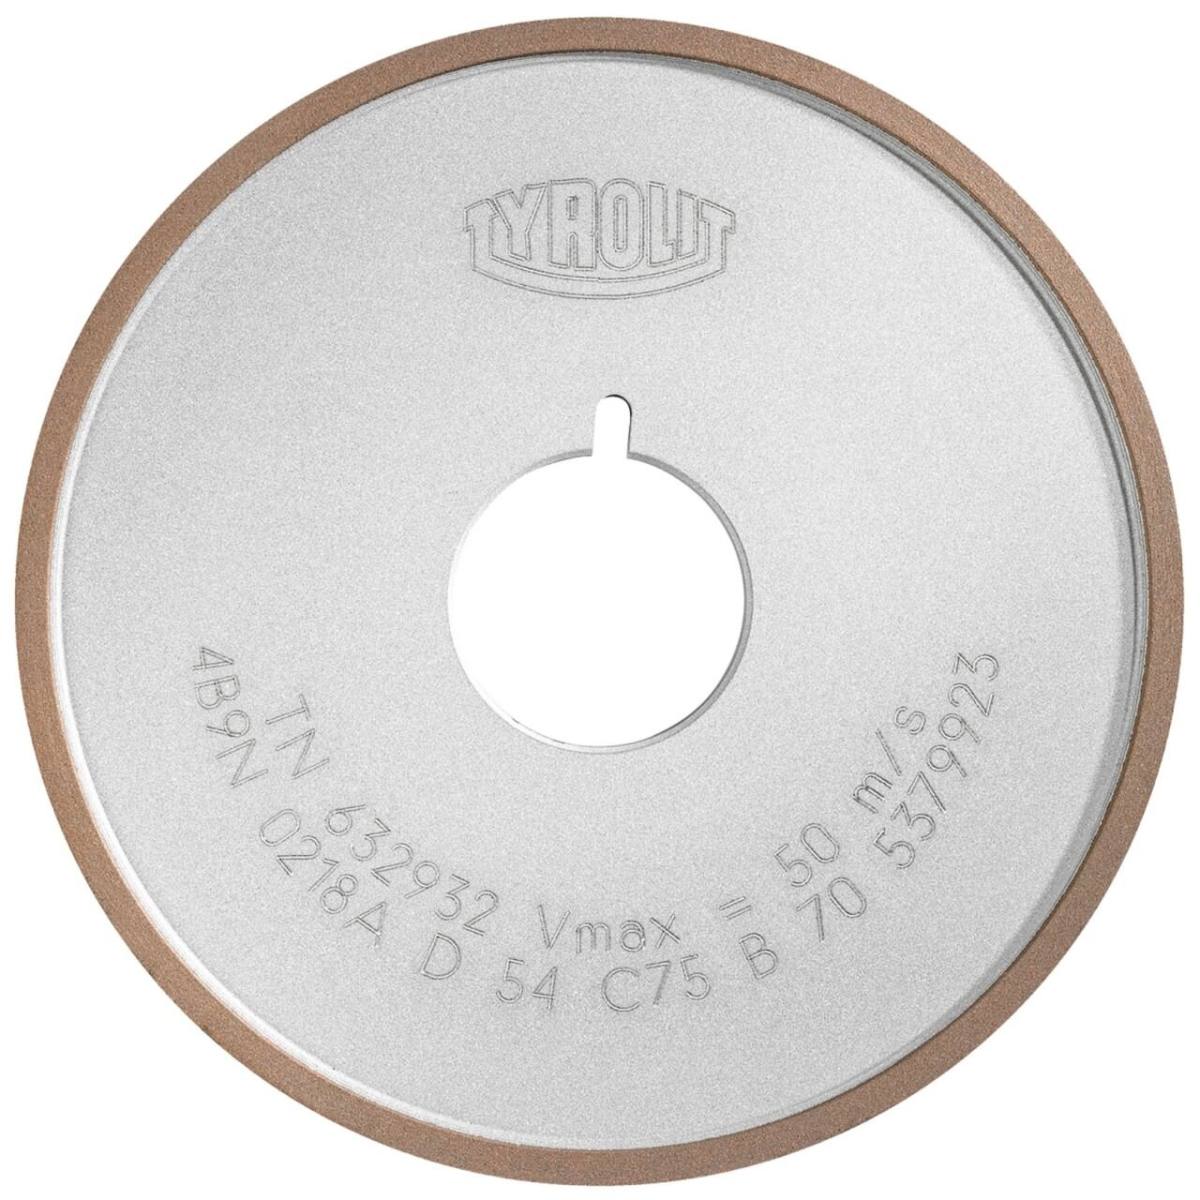 Tyrolit Resin-bonded diamond discs for chip removal (face grinding) DxDxH 200x13x32 For carbide, shape: 12V2, Art. 462766